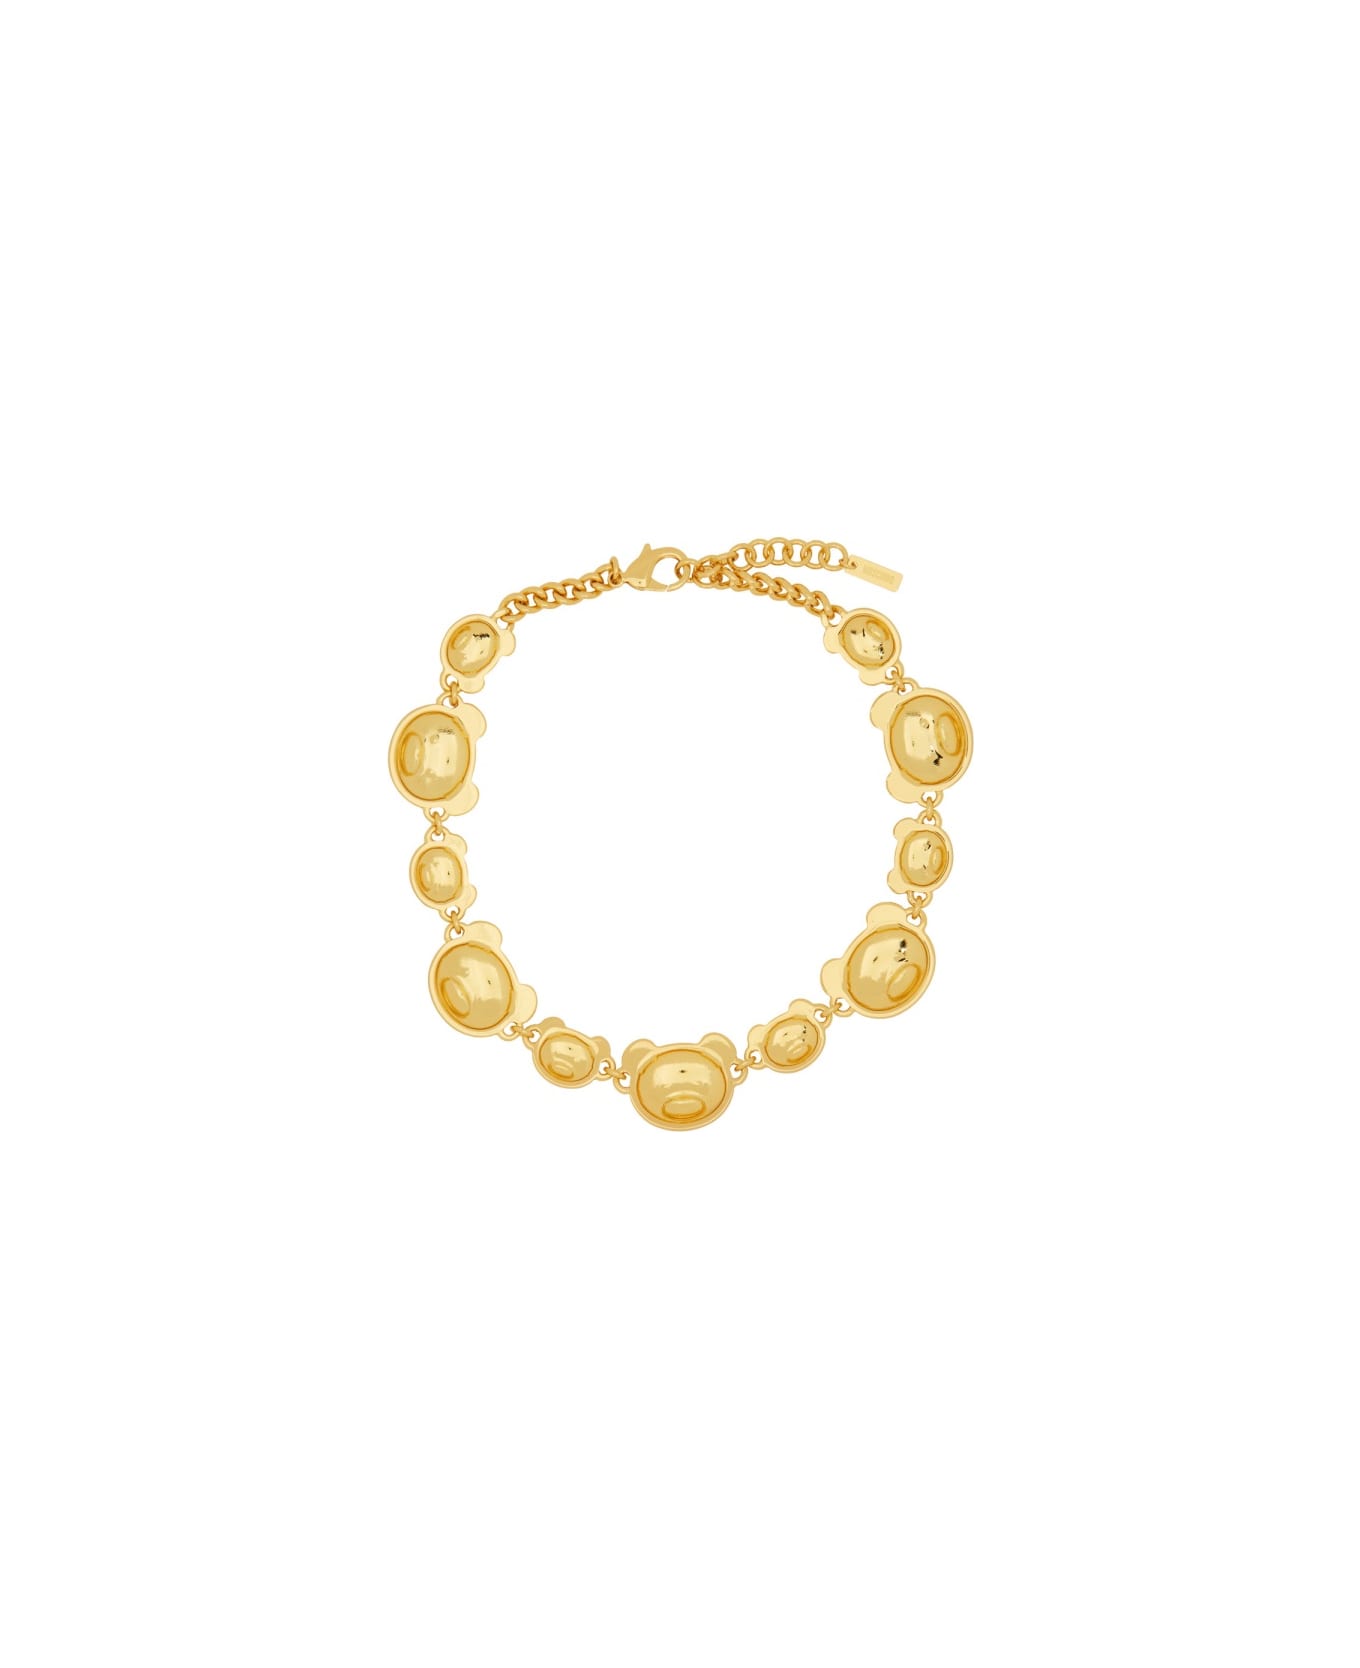 Moschino "teddy" Necklace - GOLD ネックレス